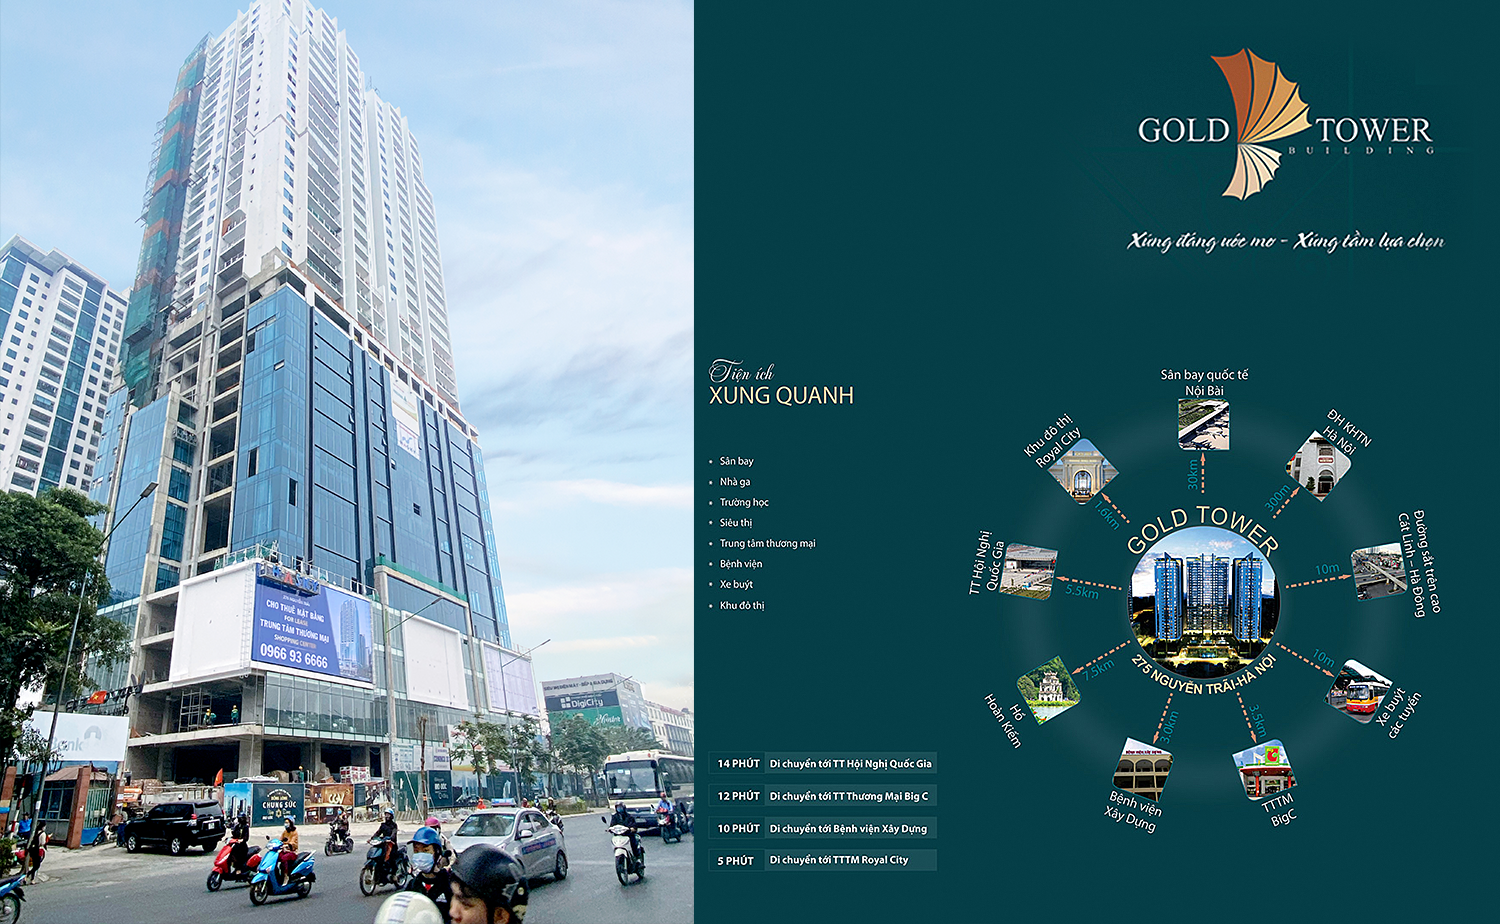 TCH: Started to hand over Gold Tower project’s apartments